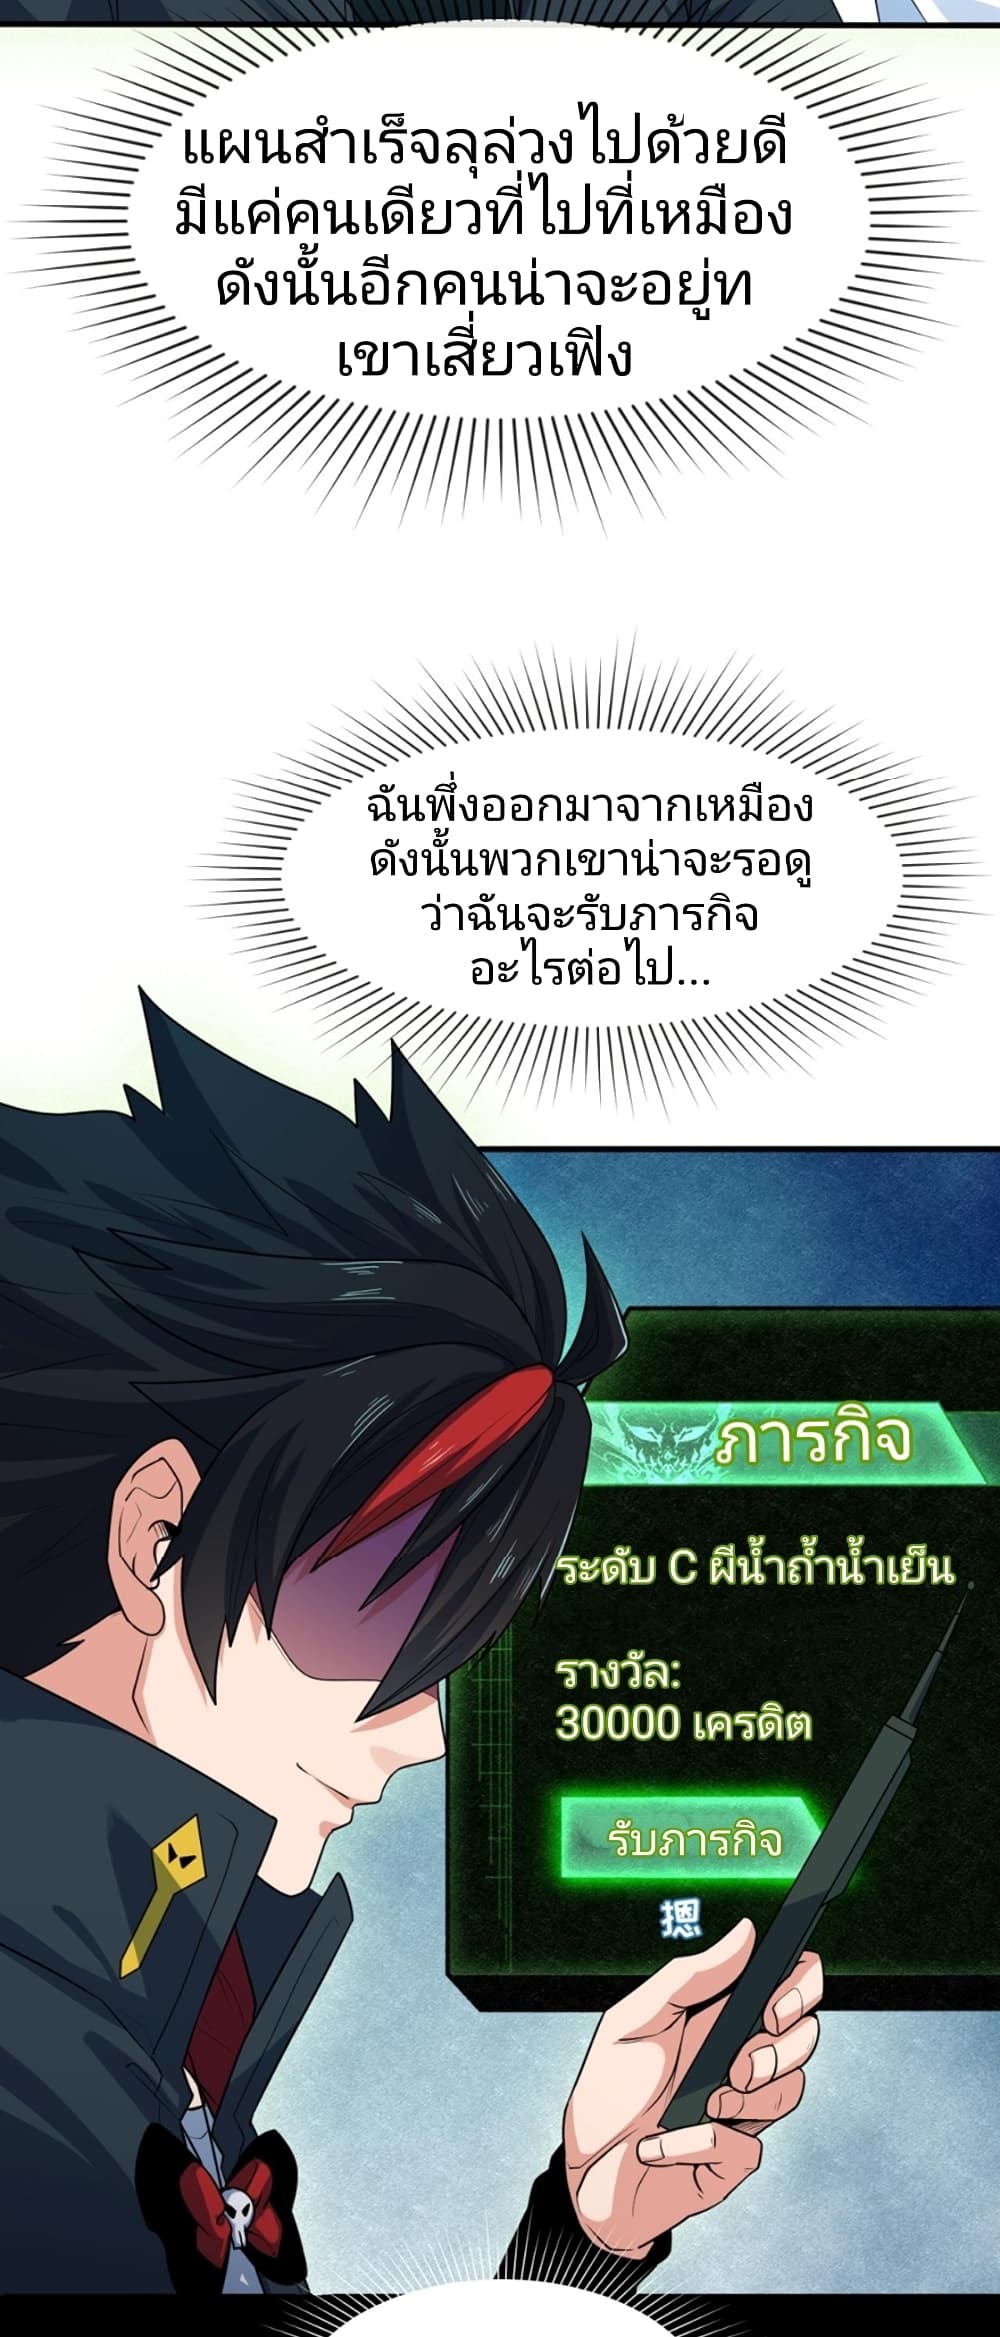 The Age of Ghost Spirits à¸à¸­à¸à¸à¸µà¹ 9 (45)